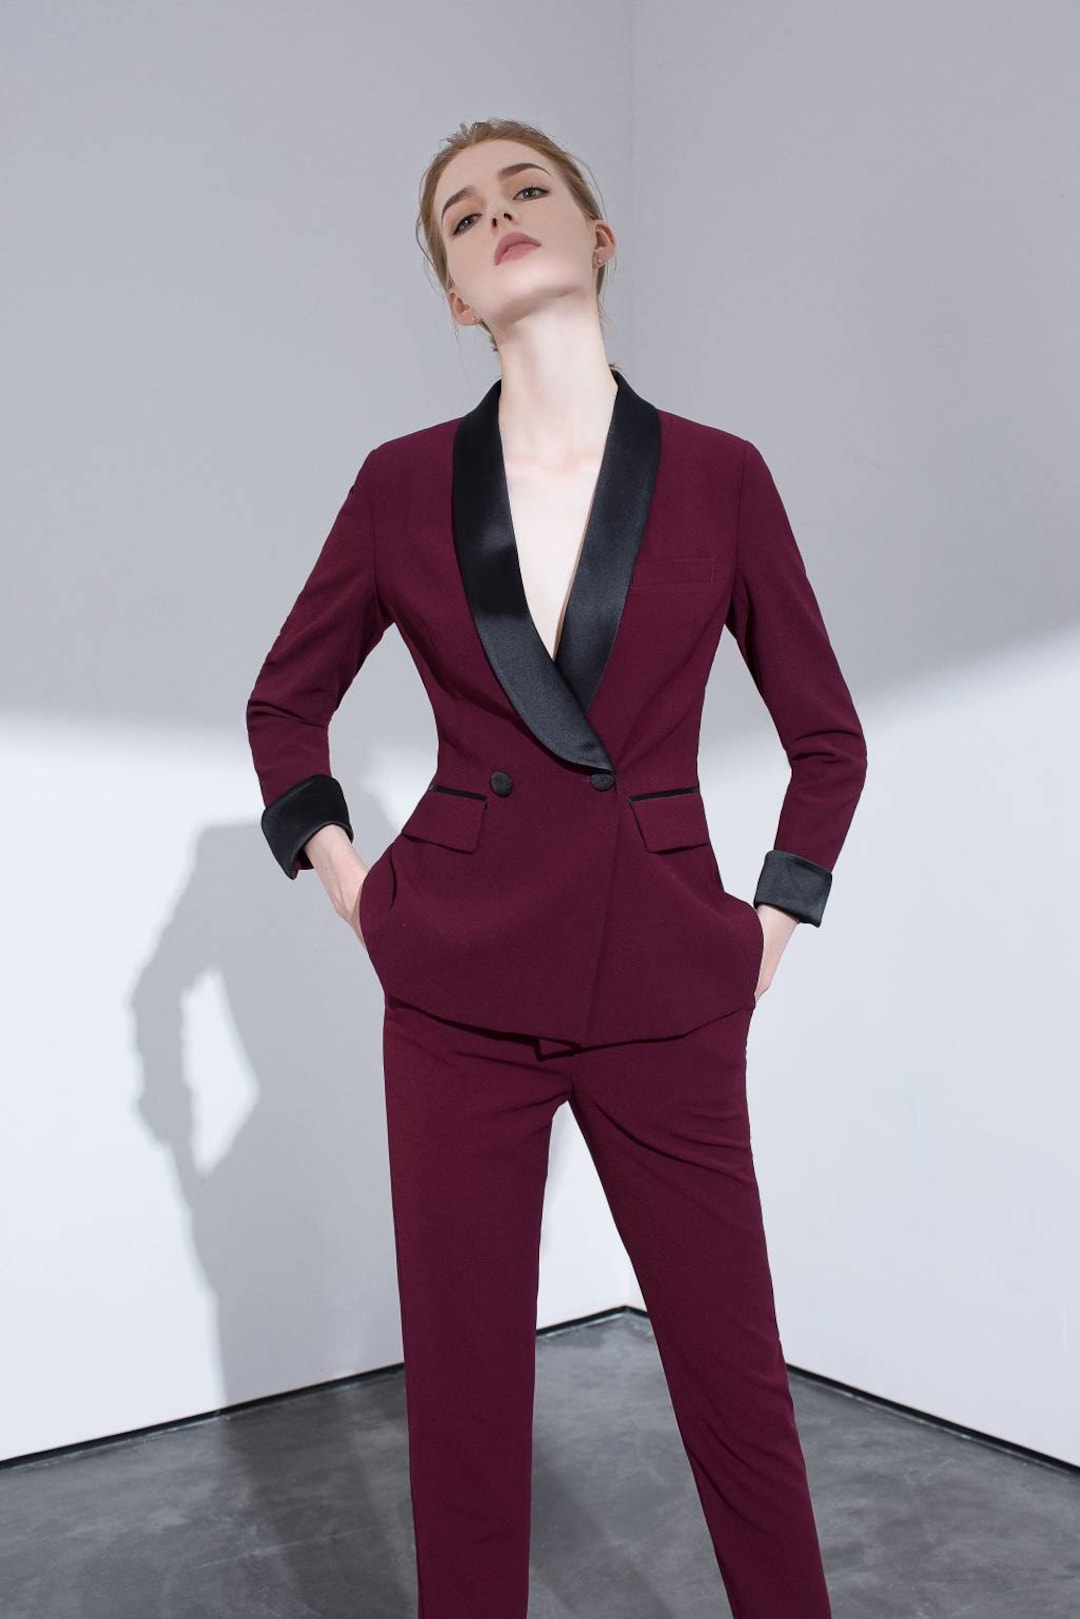  Black Work Pant Suit for Women Business Office Lady Suits Sets  2 Piece Pants Suits for Women Customization : Clothing, Shoes & Jewelry